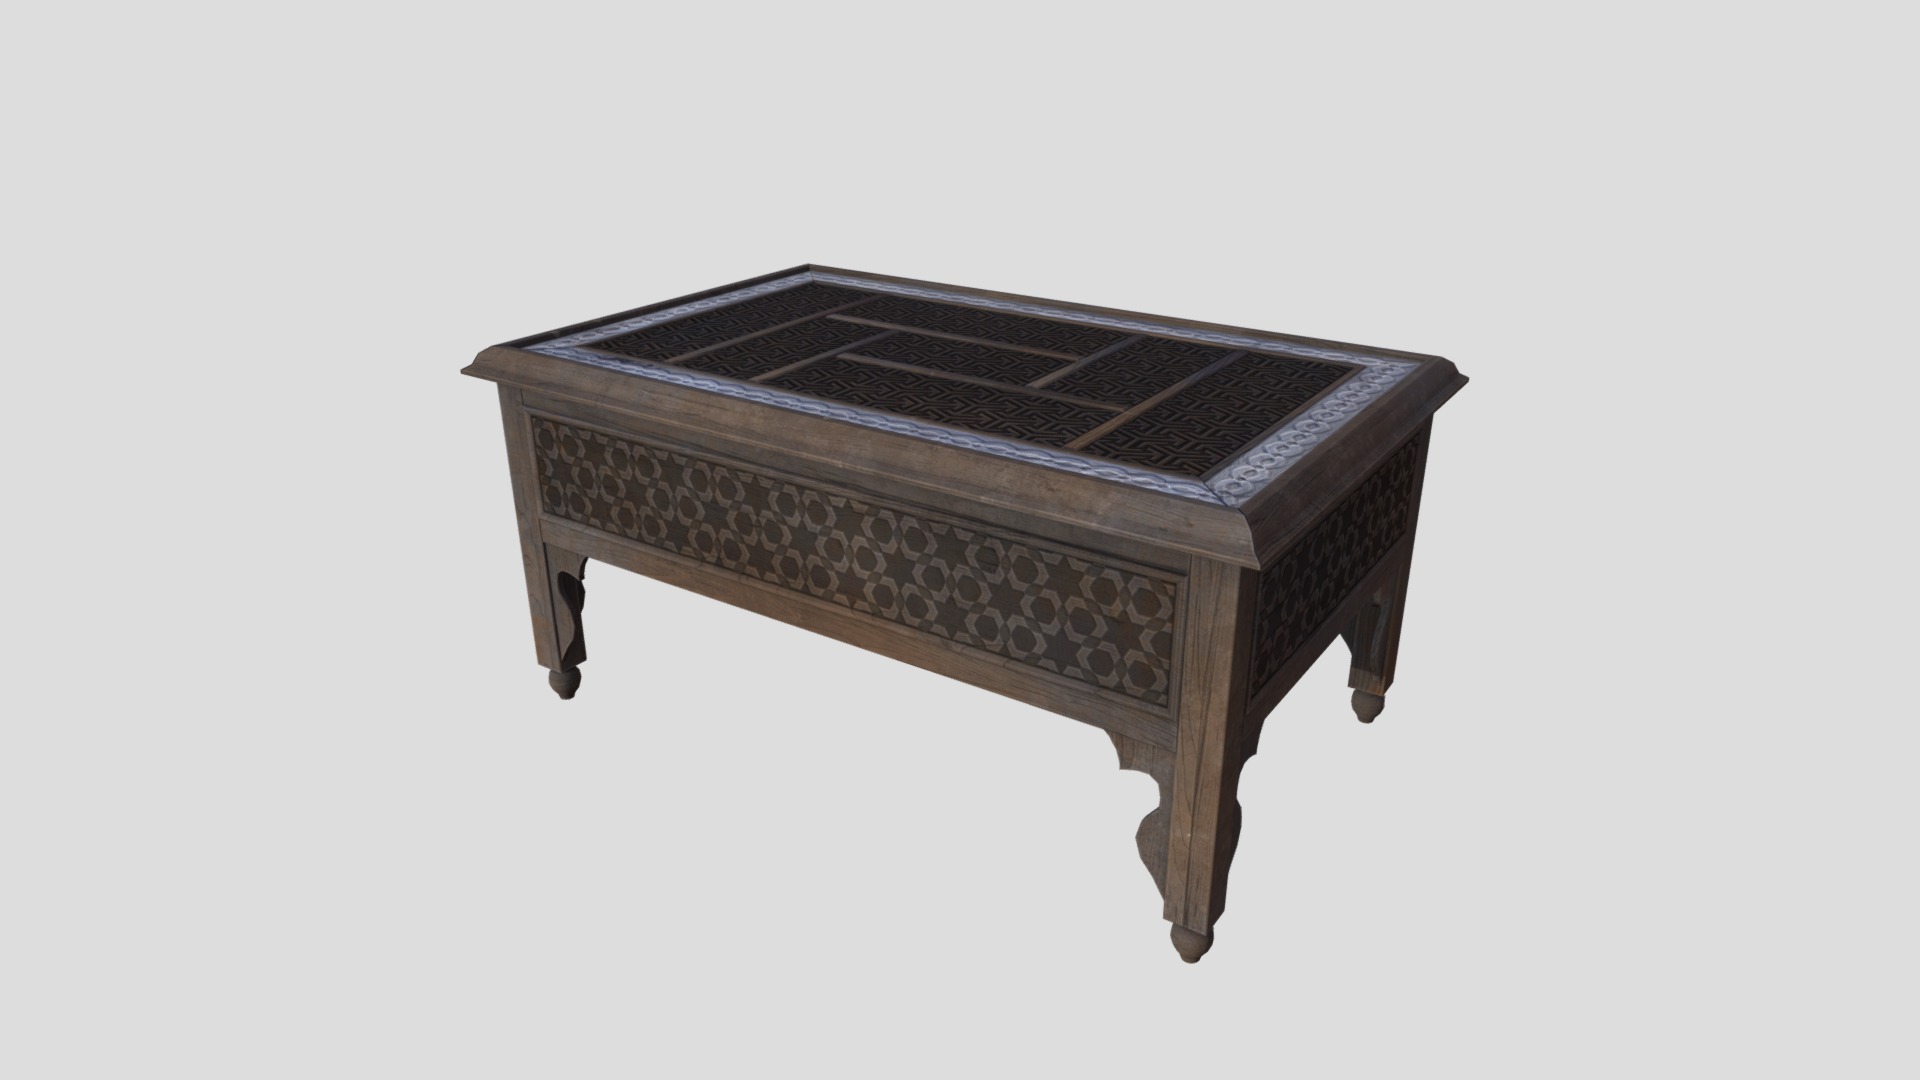 3D model Table 03 - This is a 3D model of the Table 03. The 3D model is about a wooden table with a metal top.